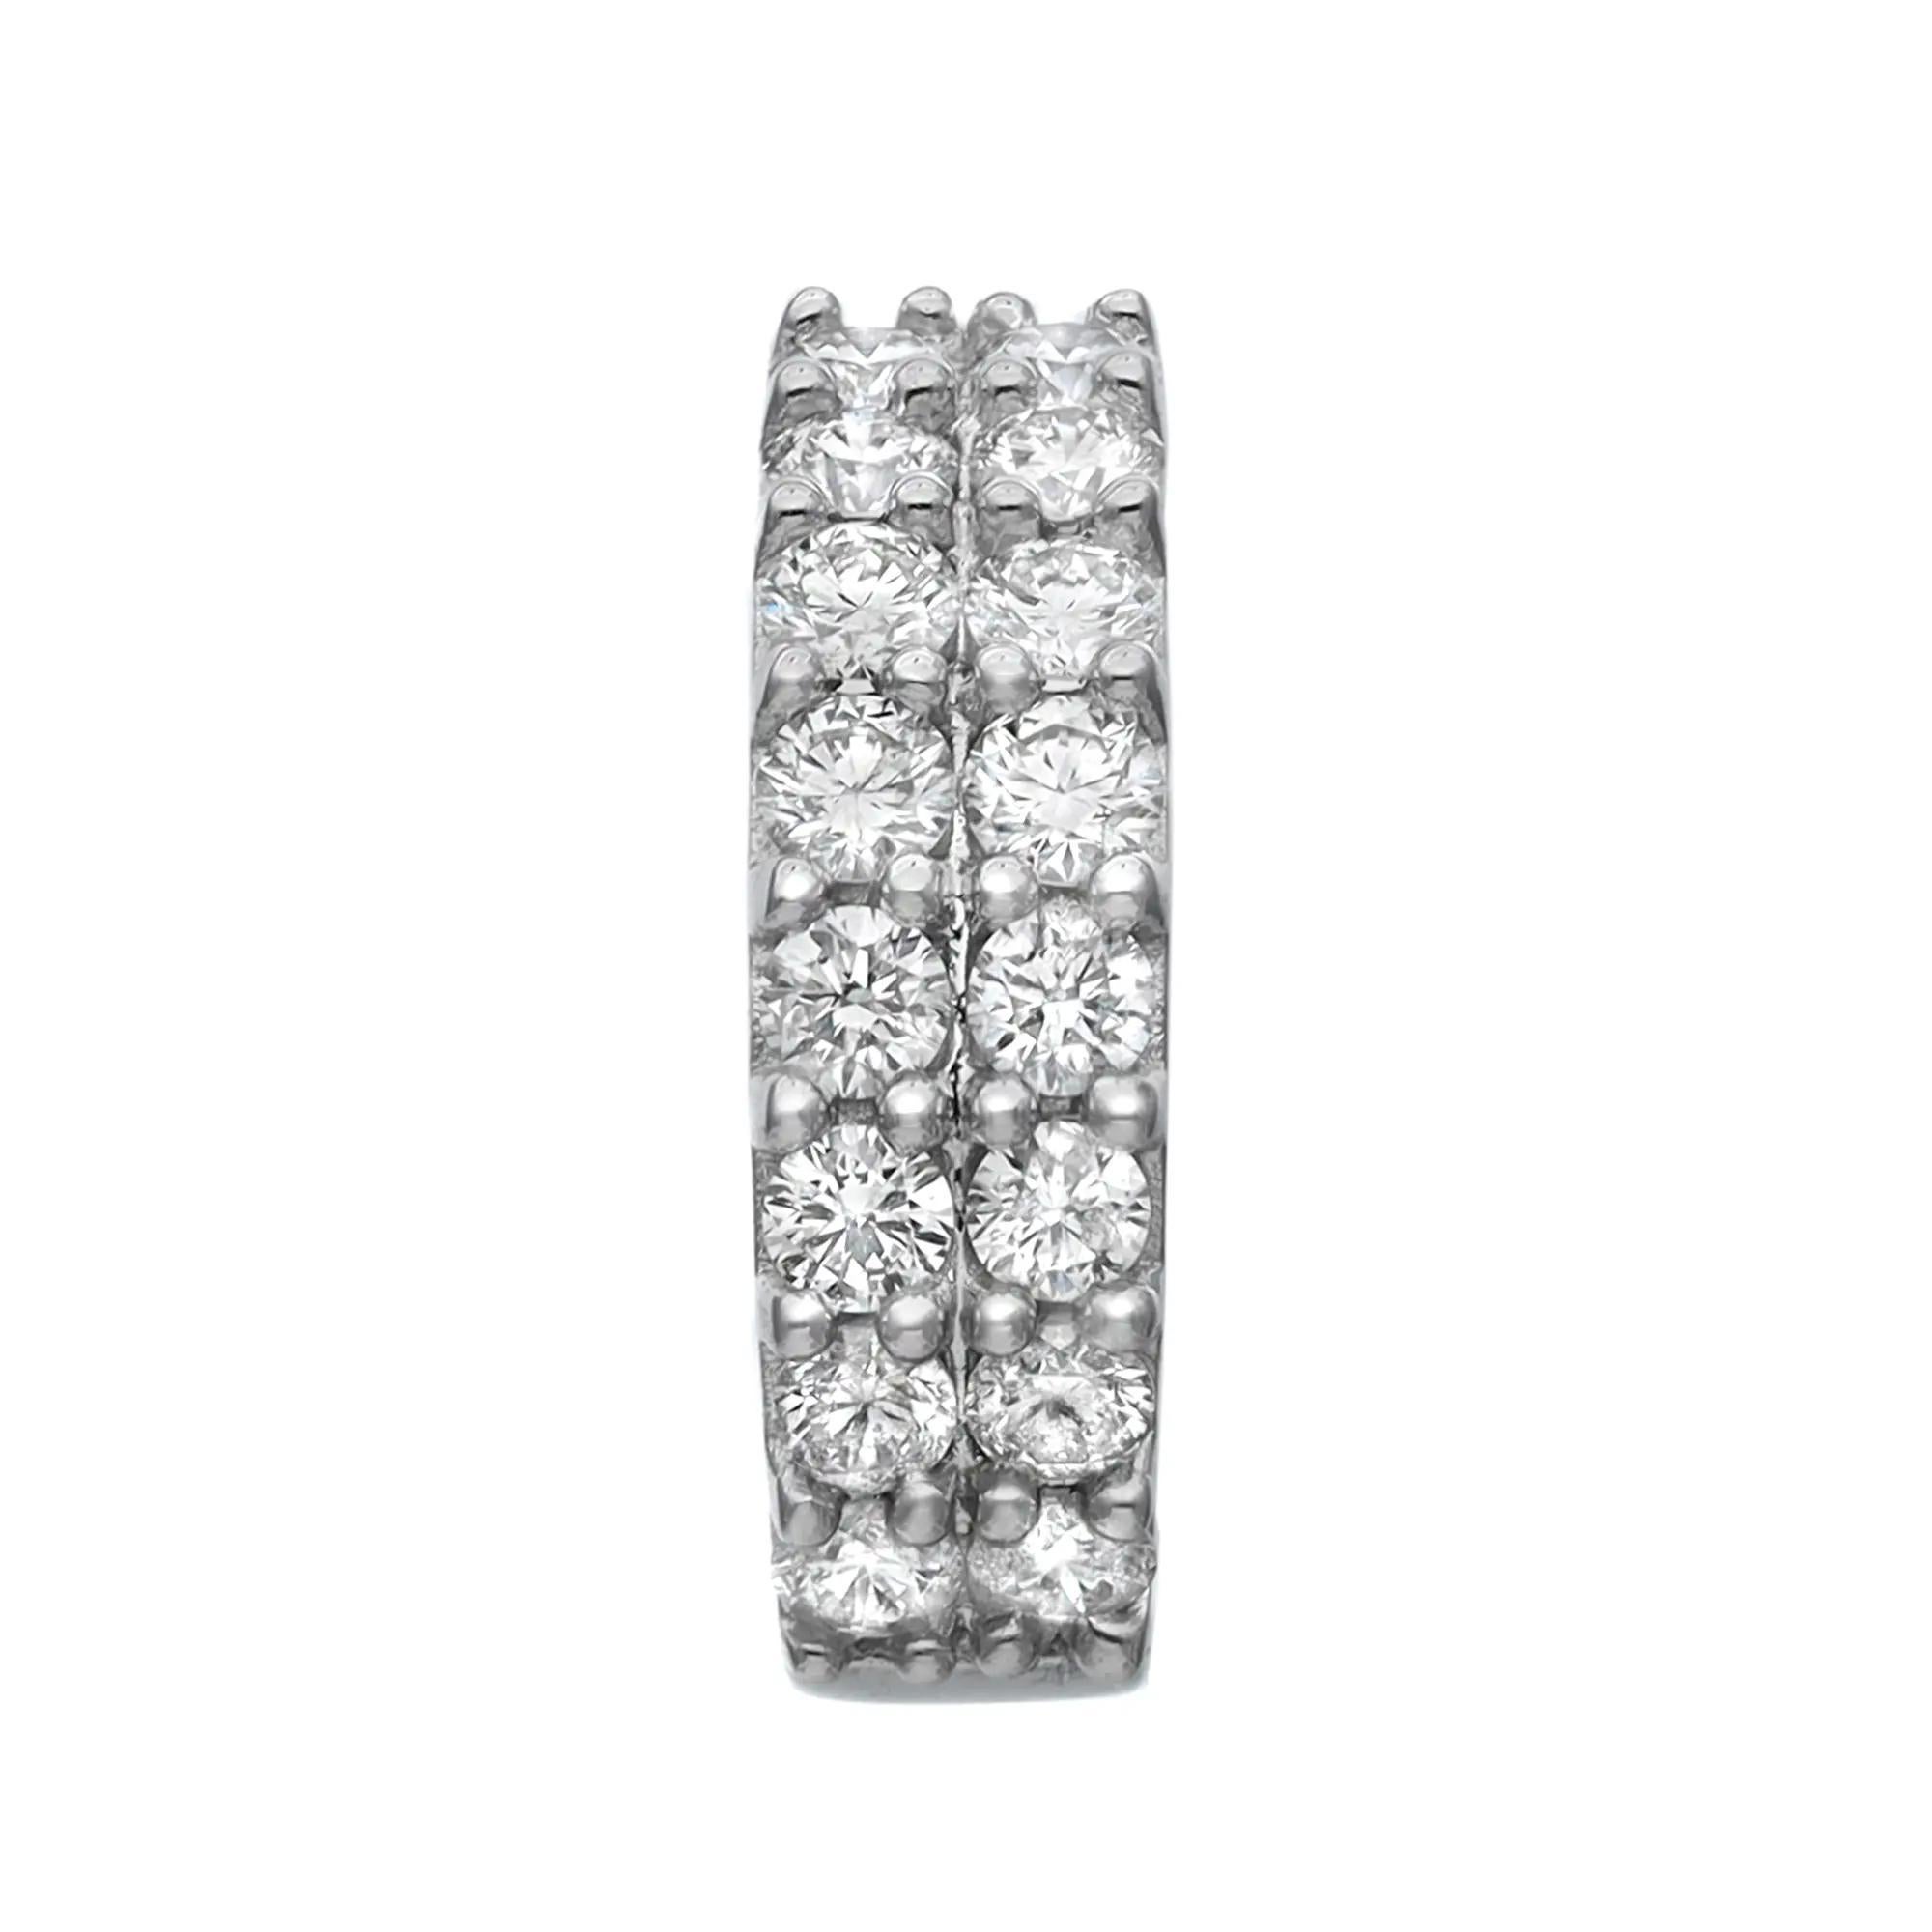 These glamorous diamond huggie earrings feature pave set round brilliant cut diamonds weighing 0.75 carat. Encrusted in lustrous 14K white gold. Diamond quality: color G-H and clarity VS-SI. Earring size: 15mm. Width: 4.8mm. Total weight: 6.38